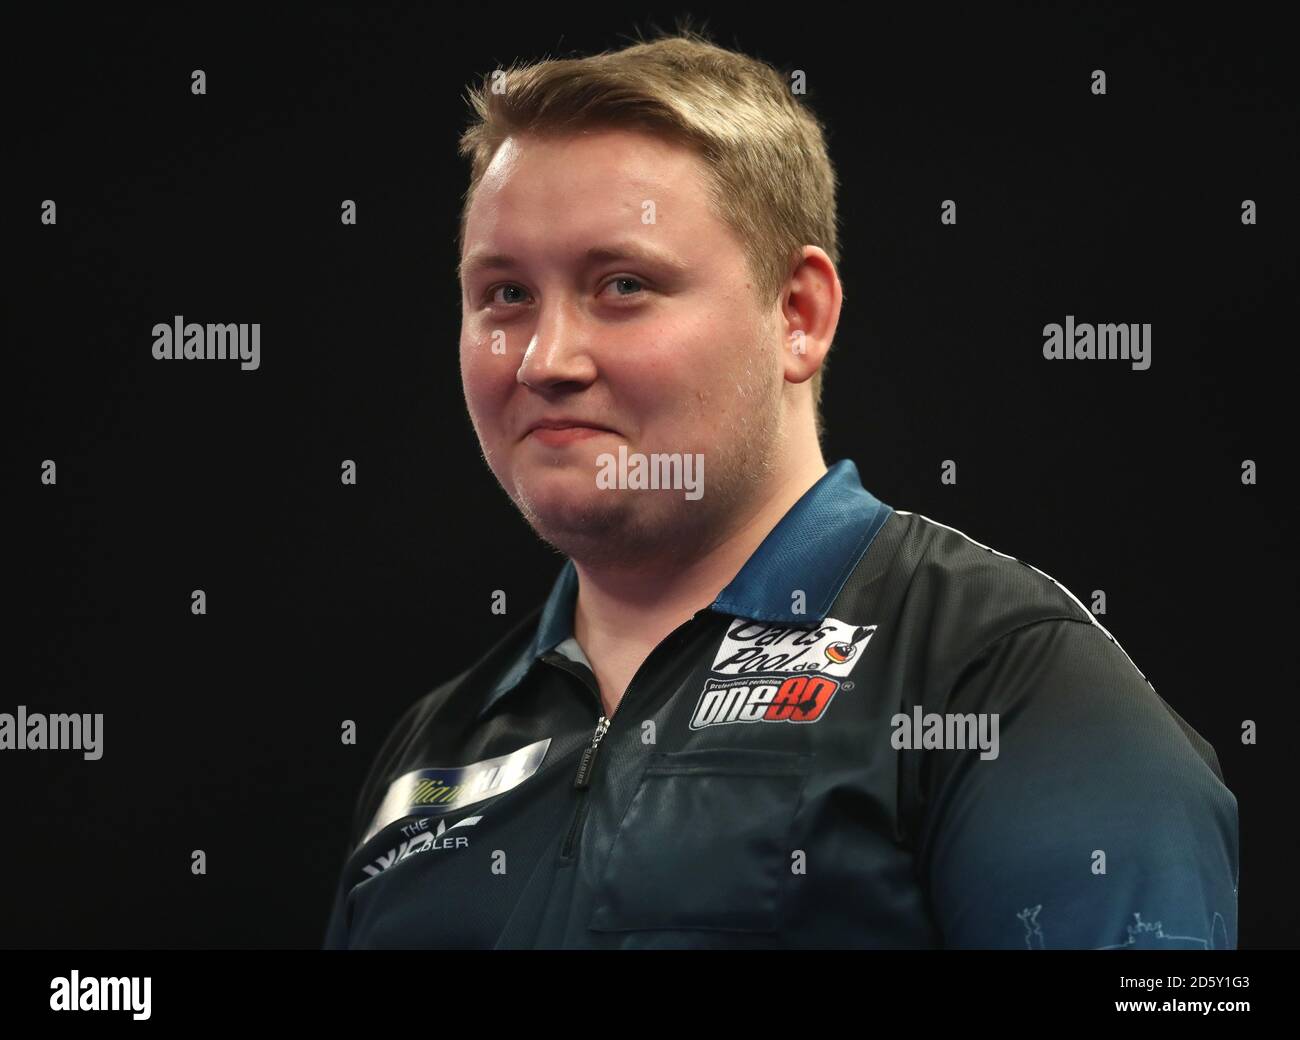 Martin Schindler during day seven of the William Hill World Darts  Championship at Alexandra Palace, London Stock Photo - Alamy